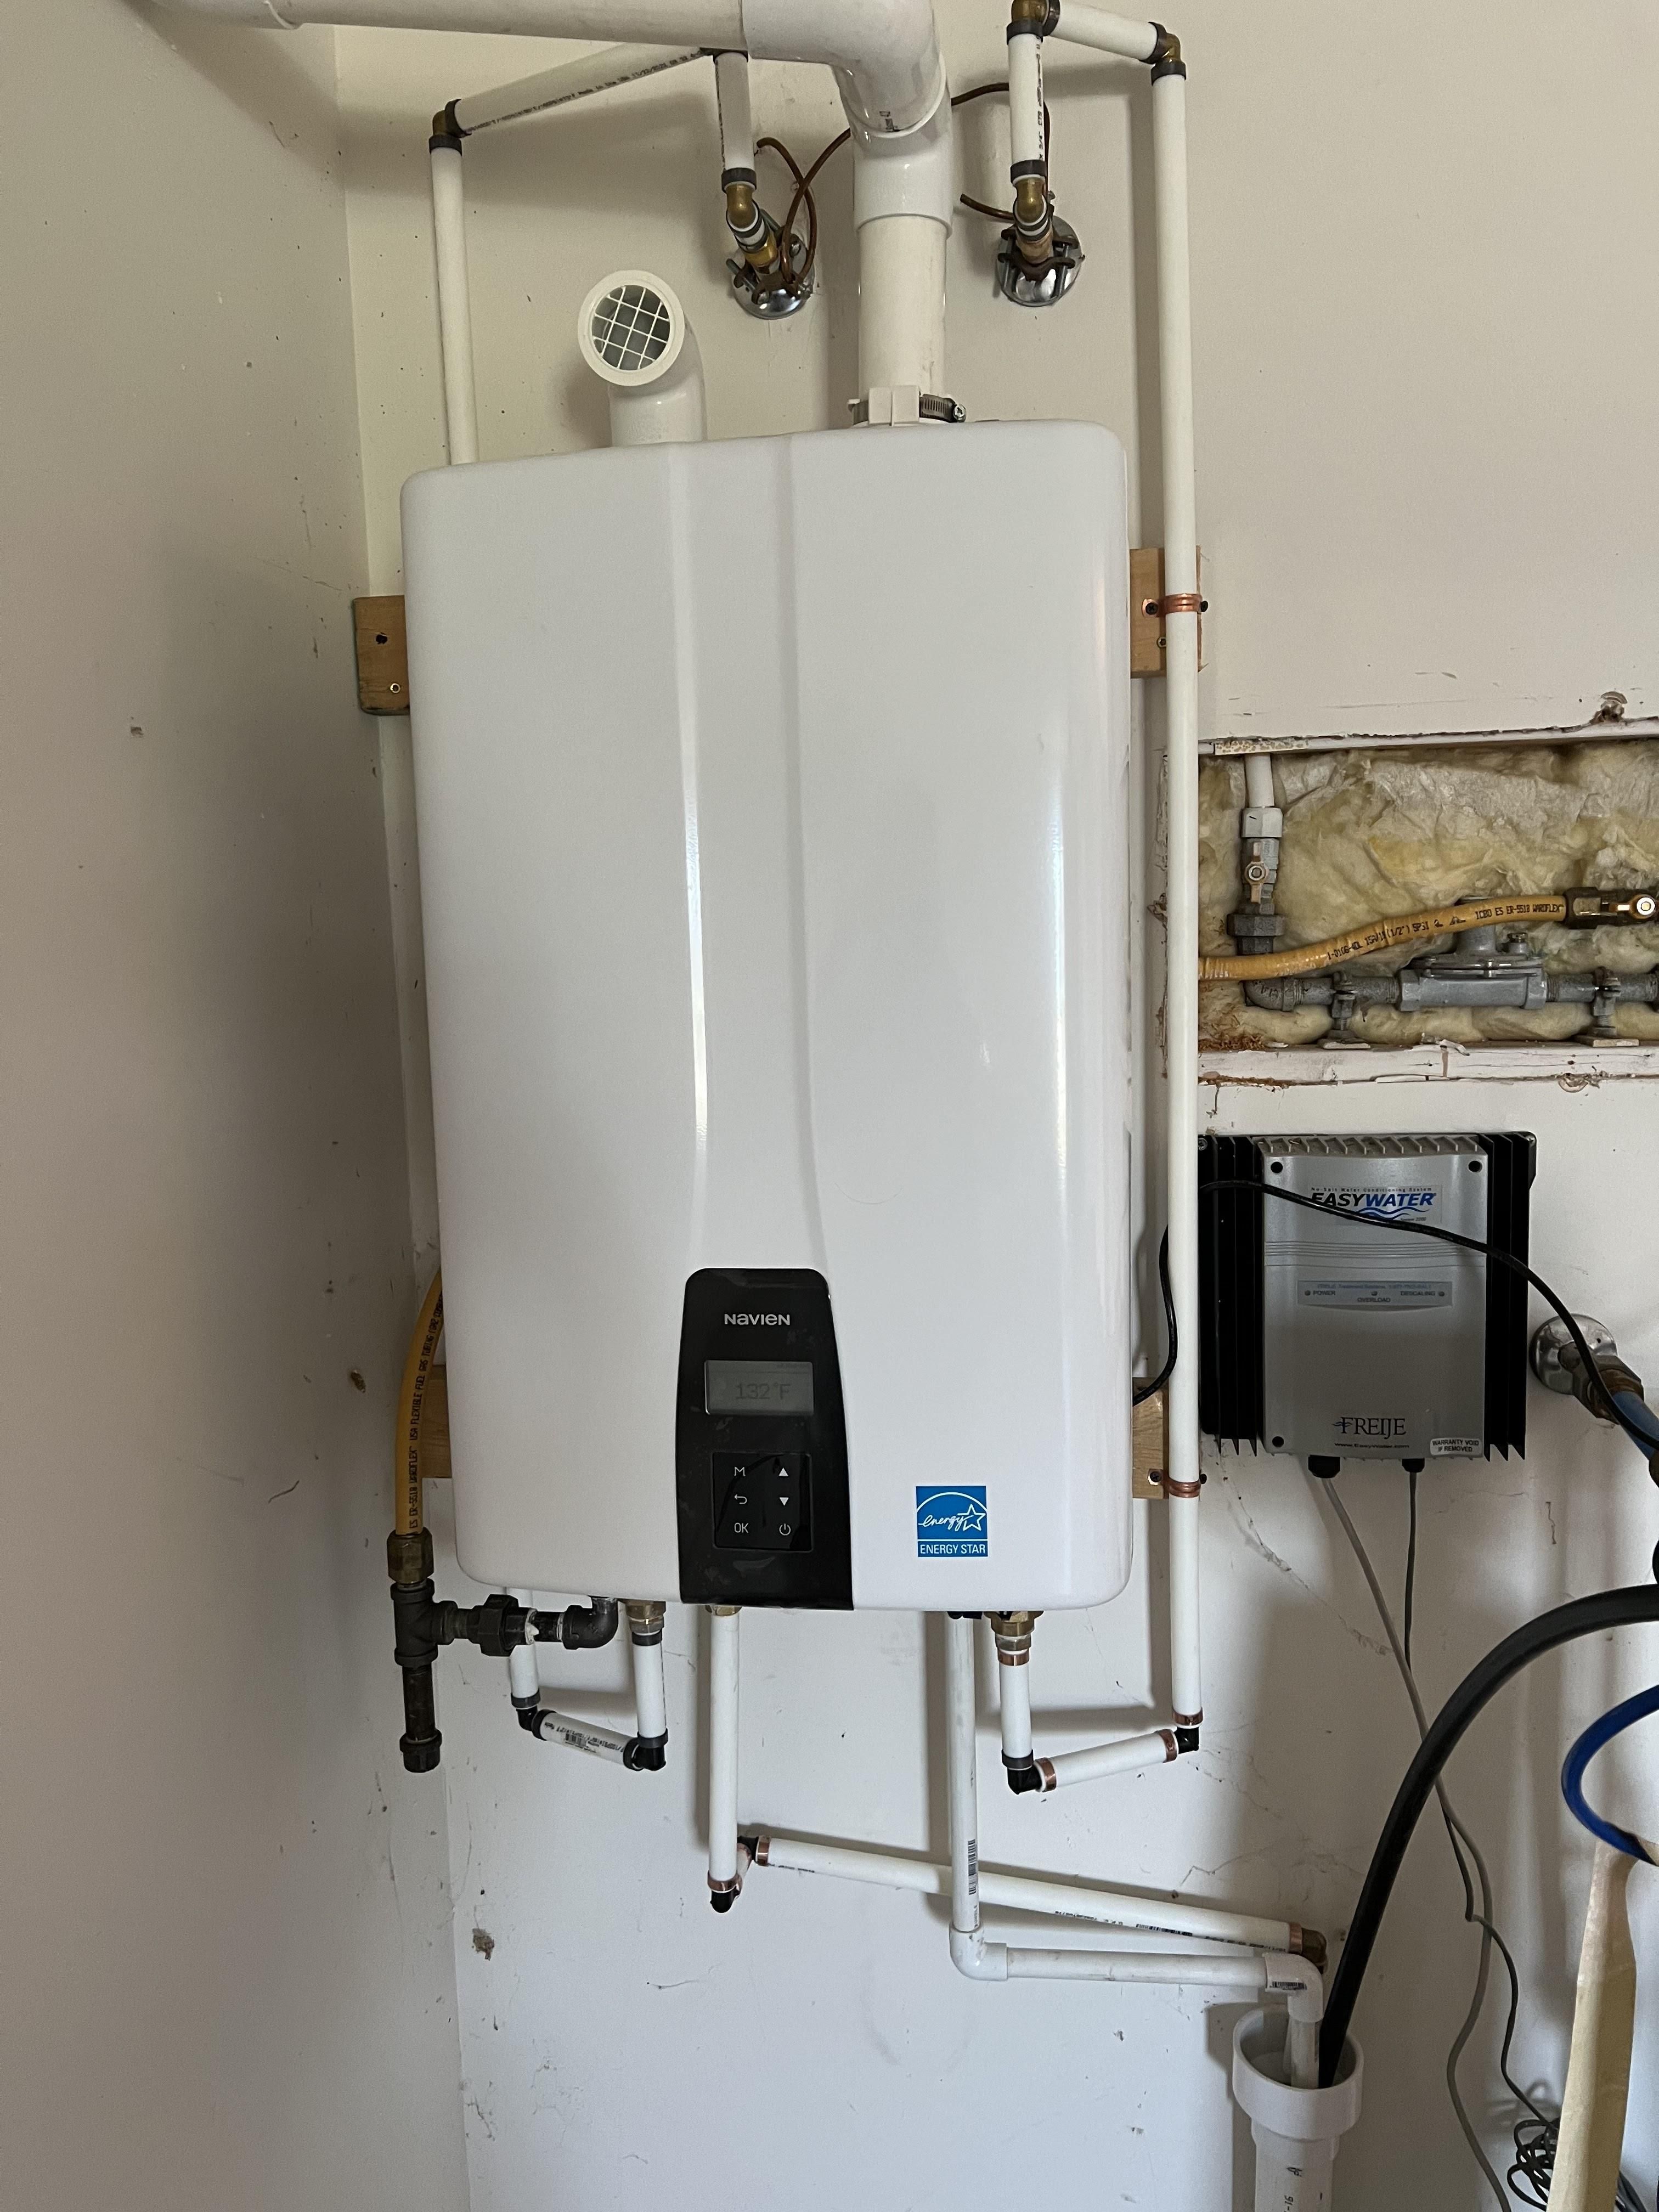 Water Heater & Tankless Water Heaters for Dutton Plumbing, Inc. in Whiteland, IN